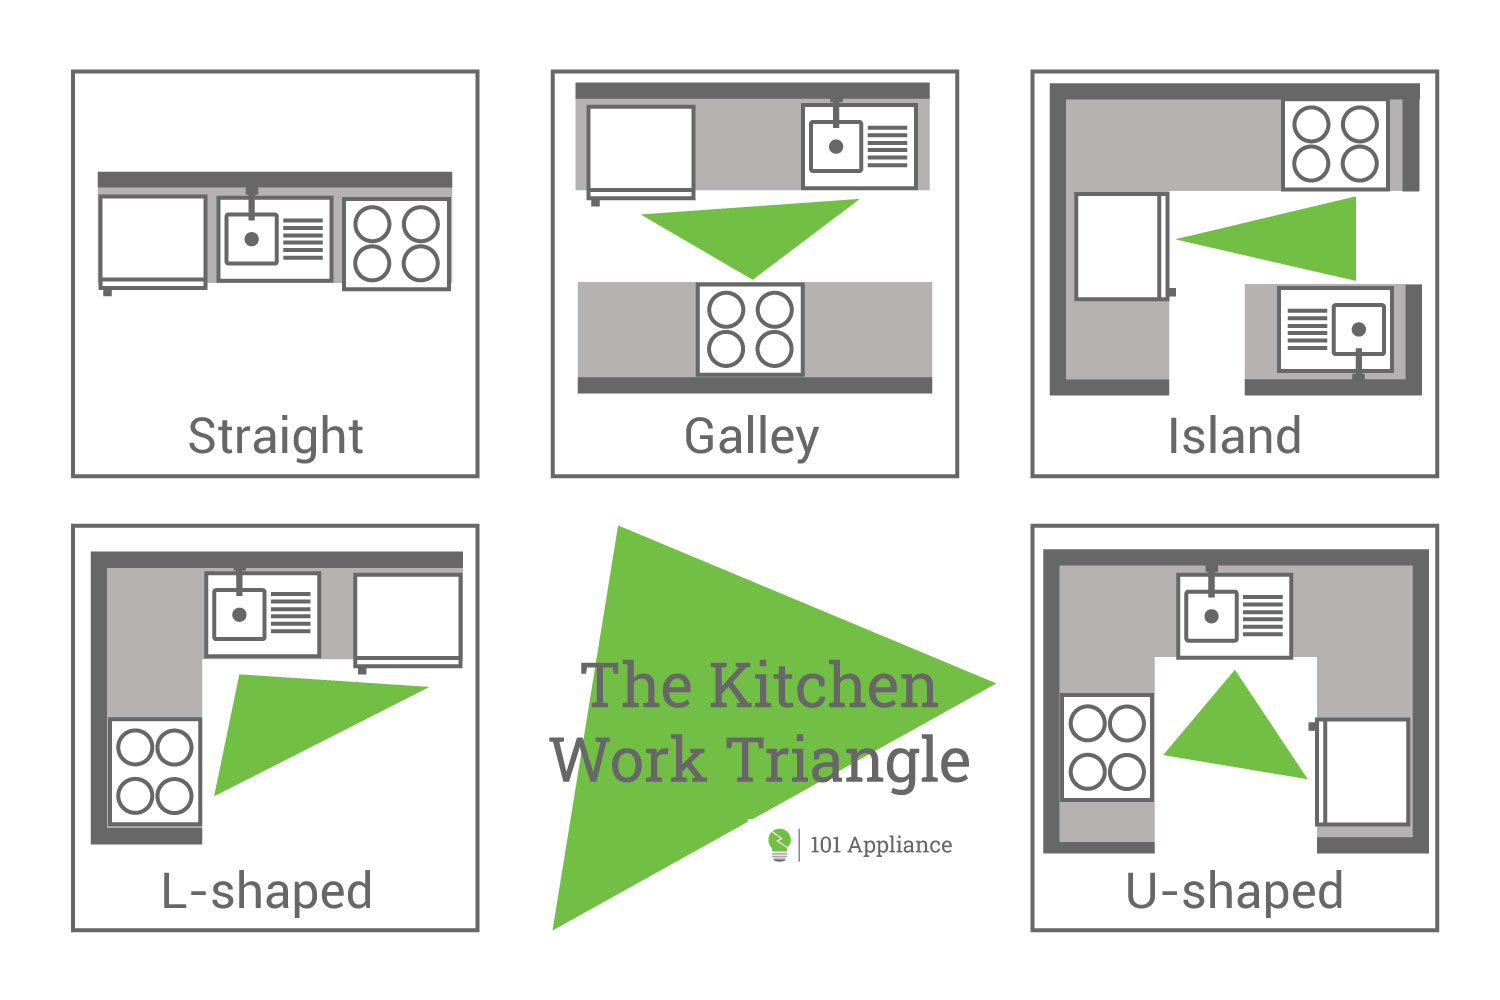 A Visual Guide On Where to Place Your Refrigerator - 101appliance